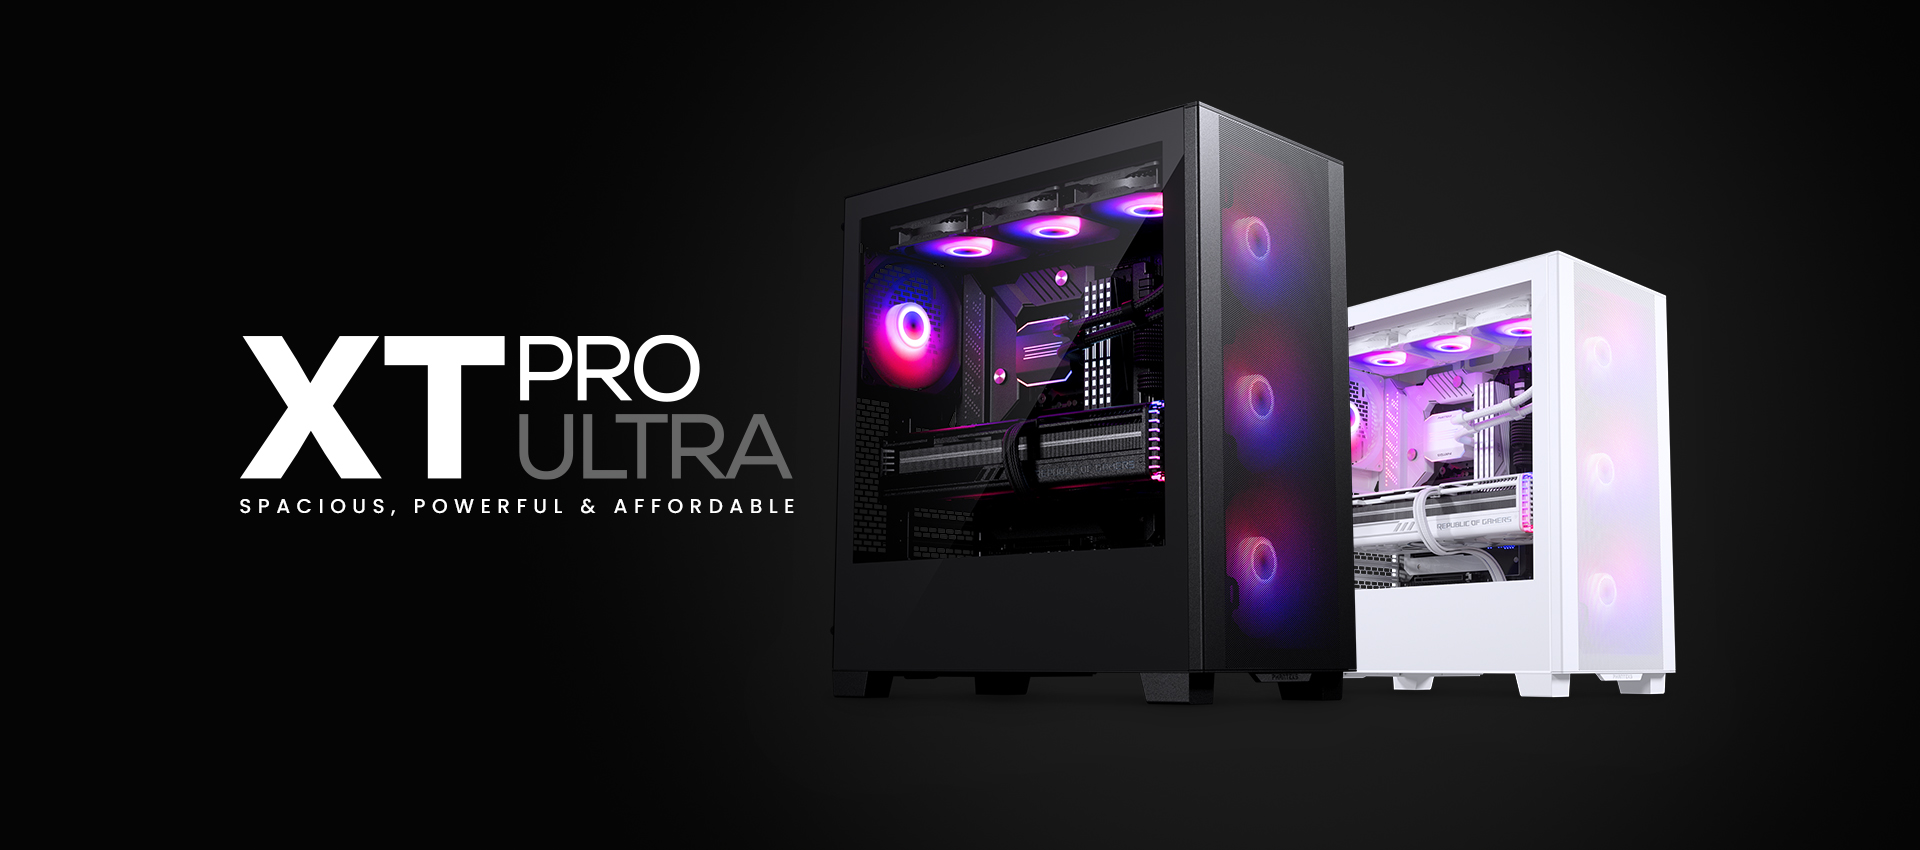 Banner image of XT Pro chassis